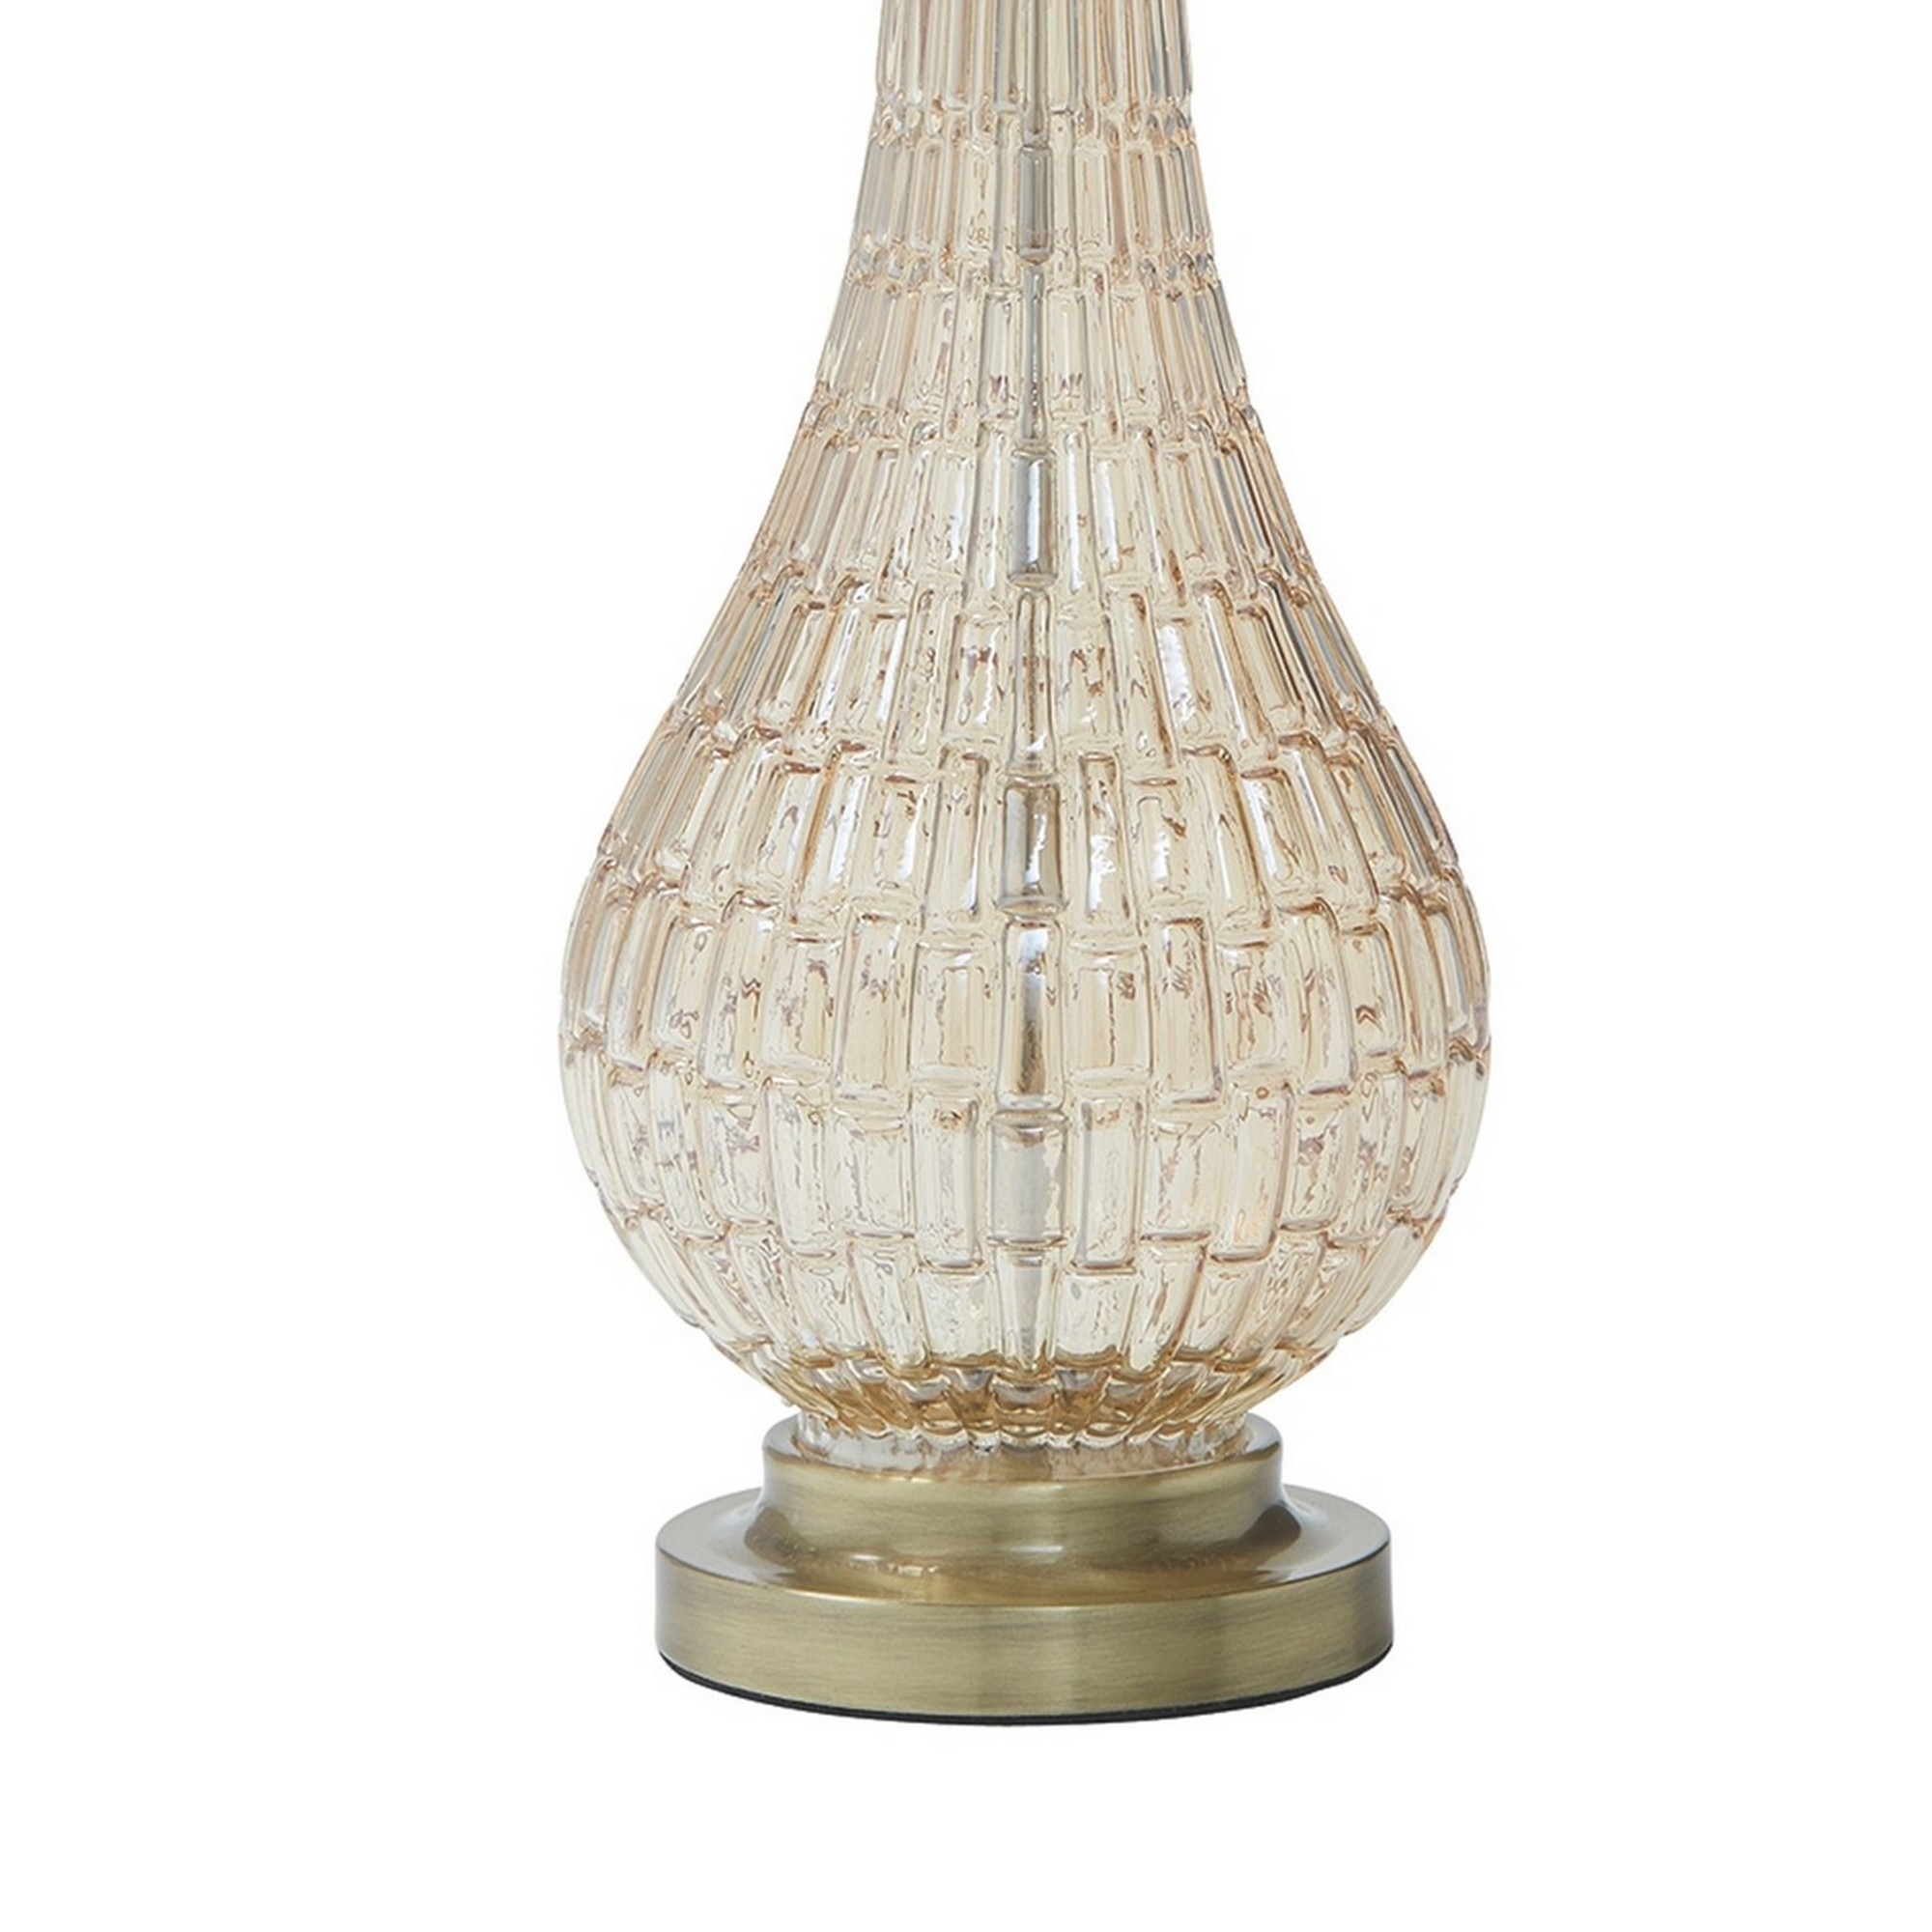 Bellied Glass Table Lamp With Fabric Drum Shade, Beige And Clear- Saltoro Sherpi